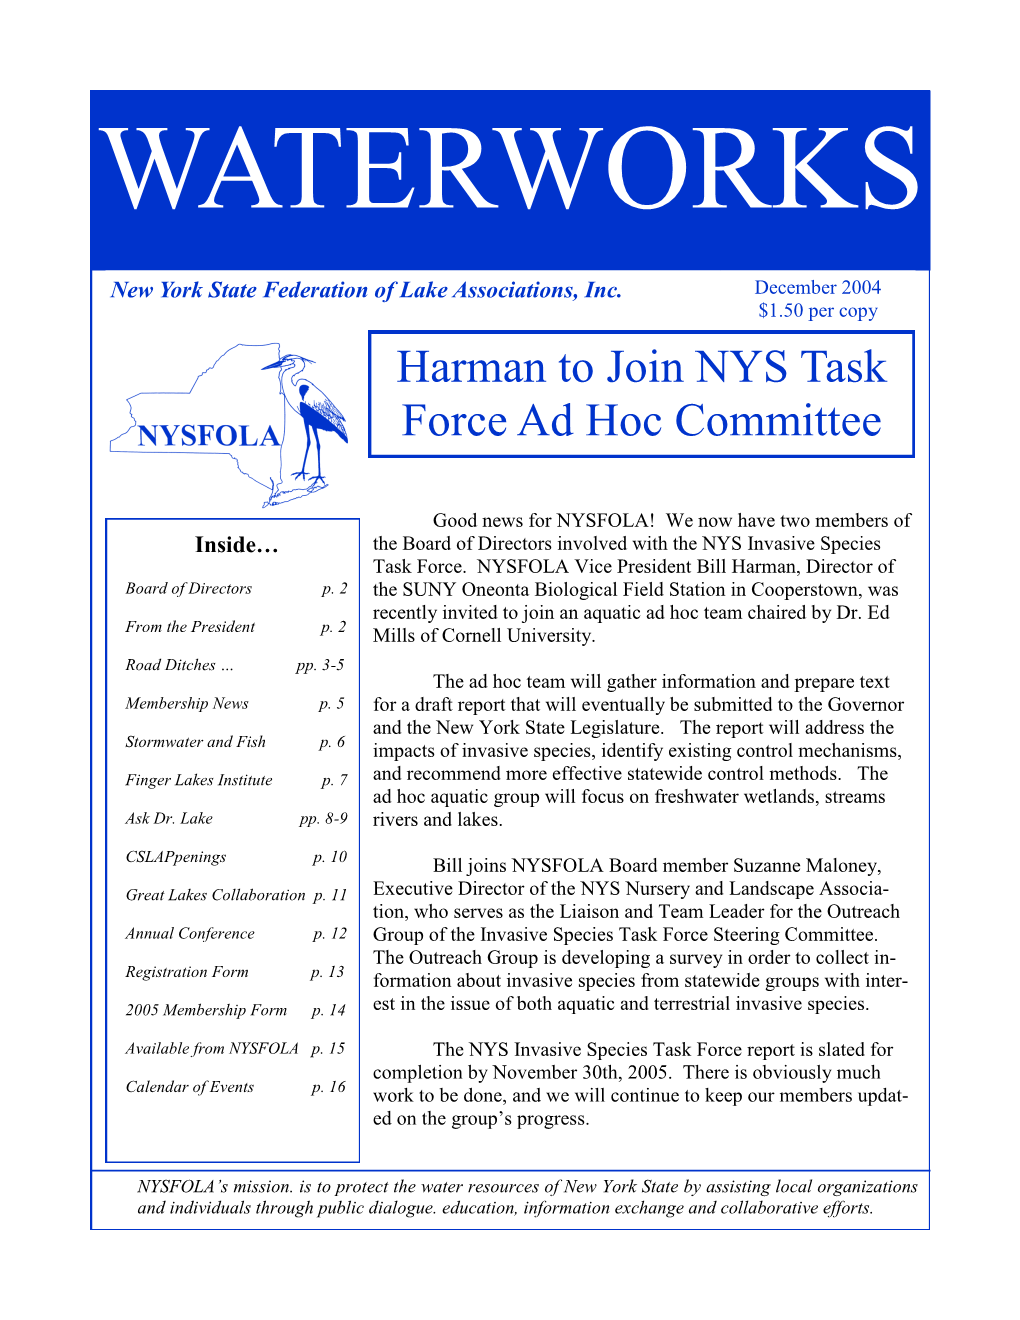 Harman to Join NYS Task Force Ad Hoc Committee